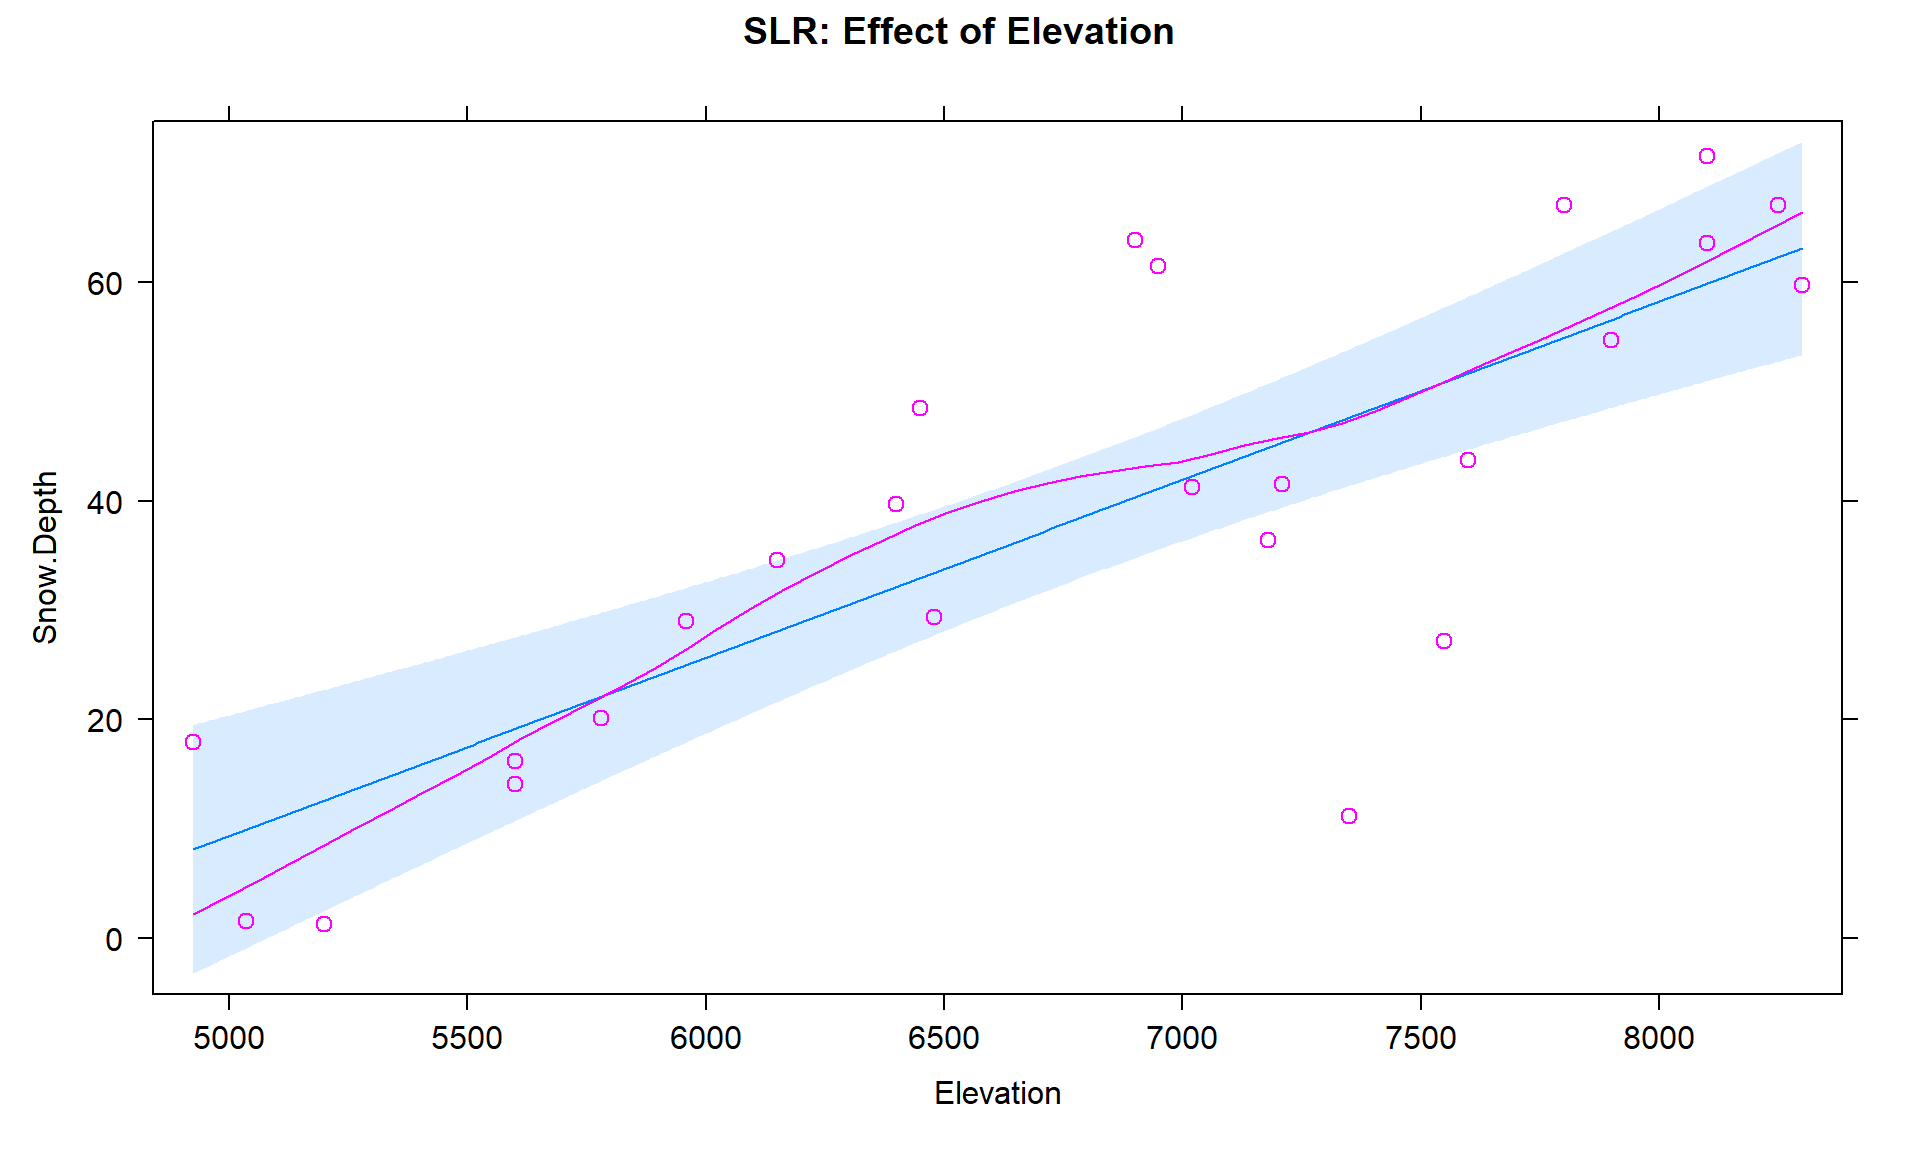 Plot of the estimated SLR model for Snow Depth with Elevation as the predictor along with observations and smoothing line generated by the residuals = T option being specified. 